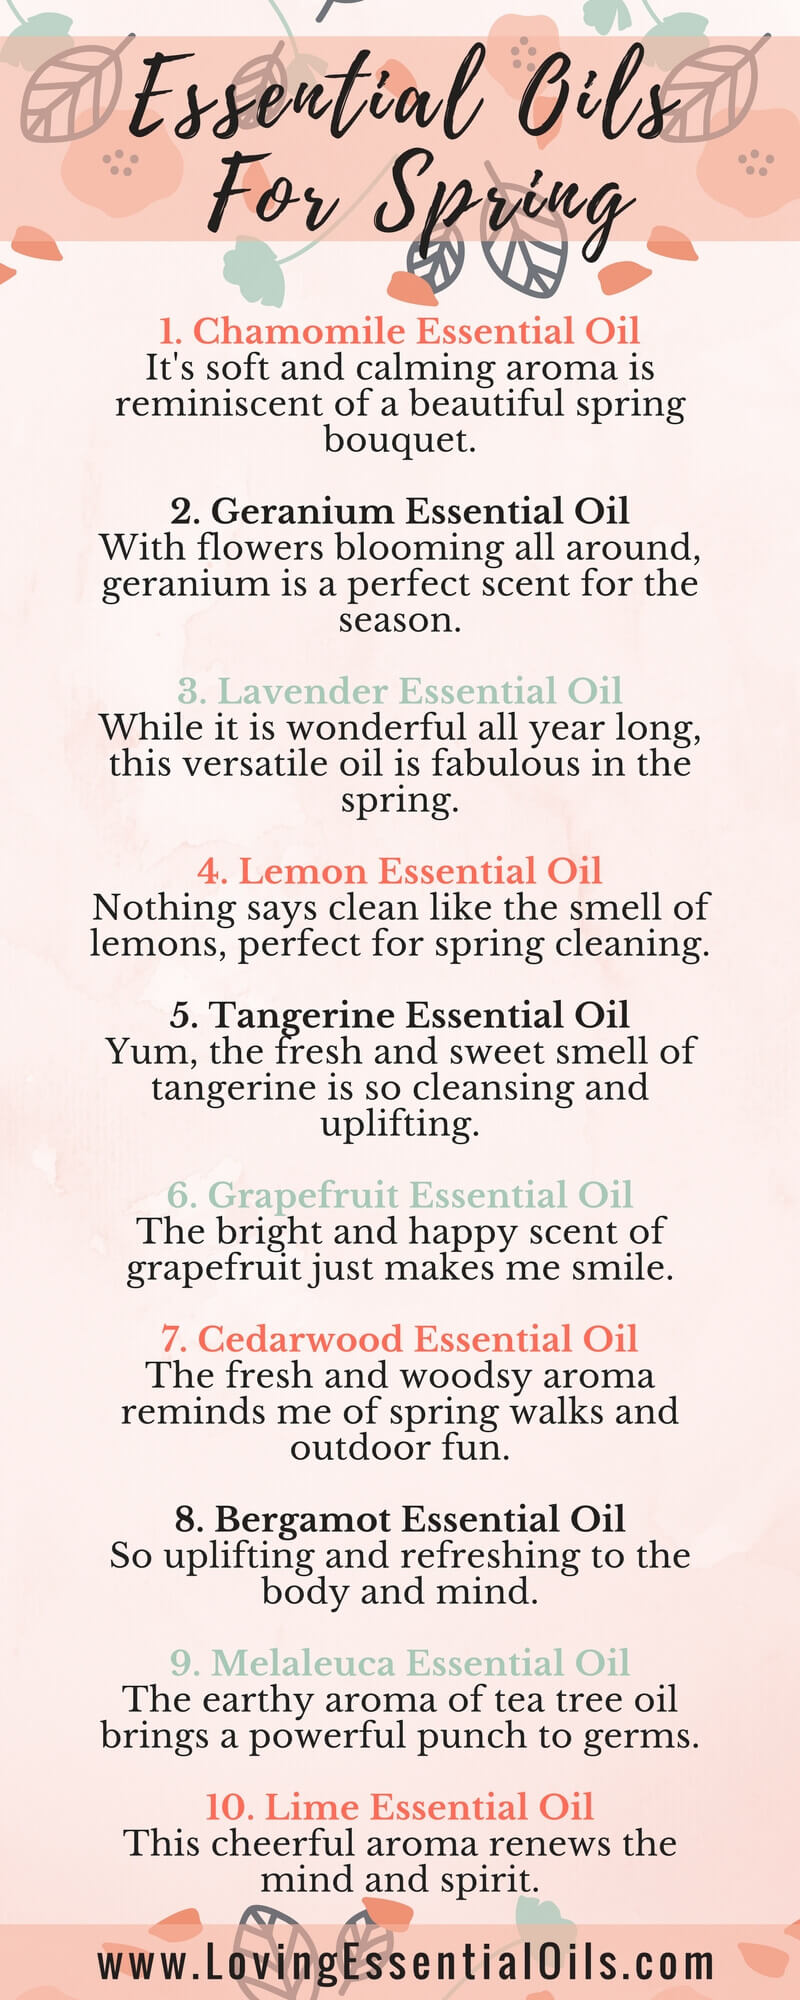 Essential Oils For Springtime with Diffuser Blends by Loving Essential Oils